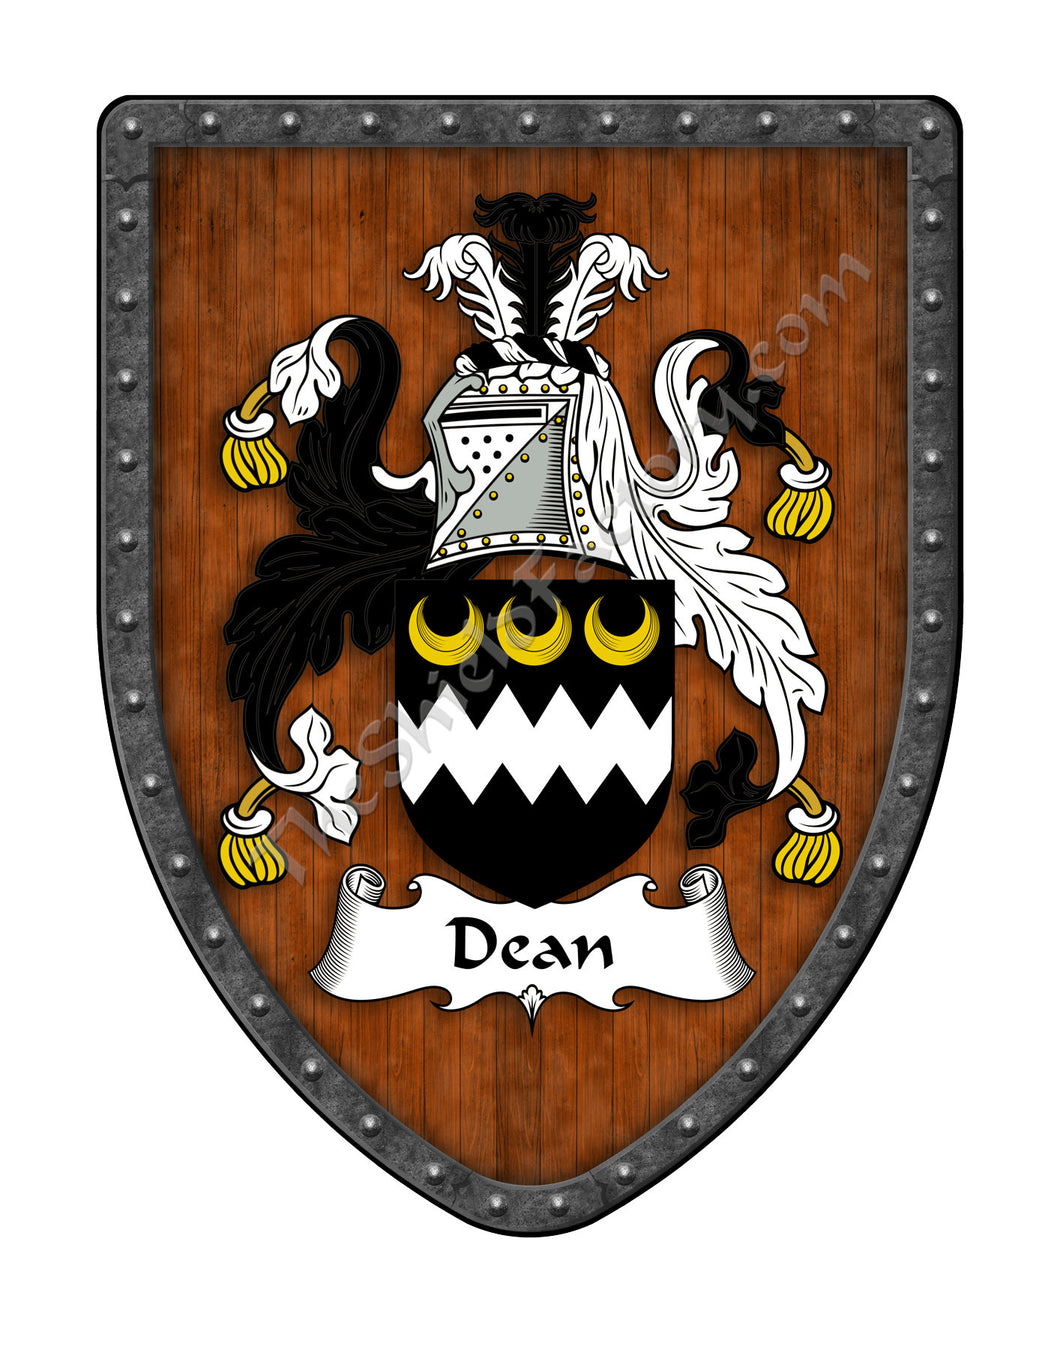 Dean Coat of Arms Shield Family Crest